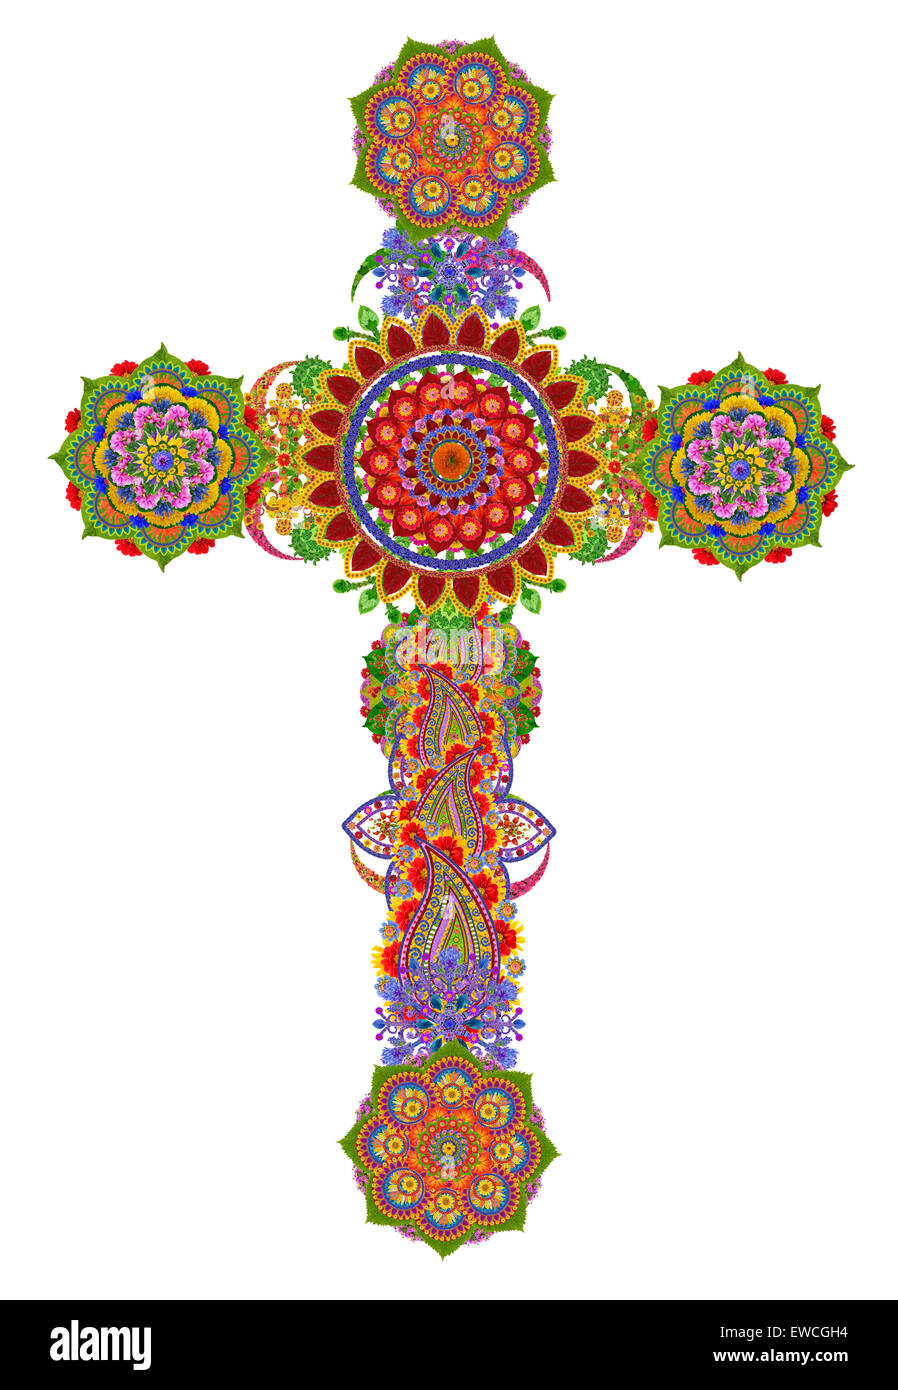 Sacred gentle cross of my God and Messiah Jesus Christ made from summer flowers. Isolated handmade collage Stock Photo